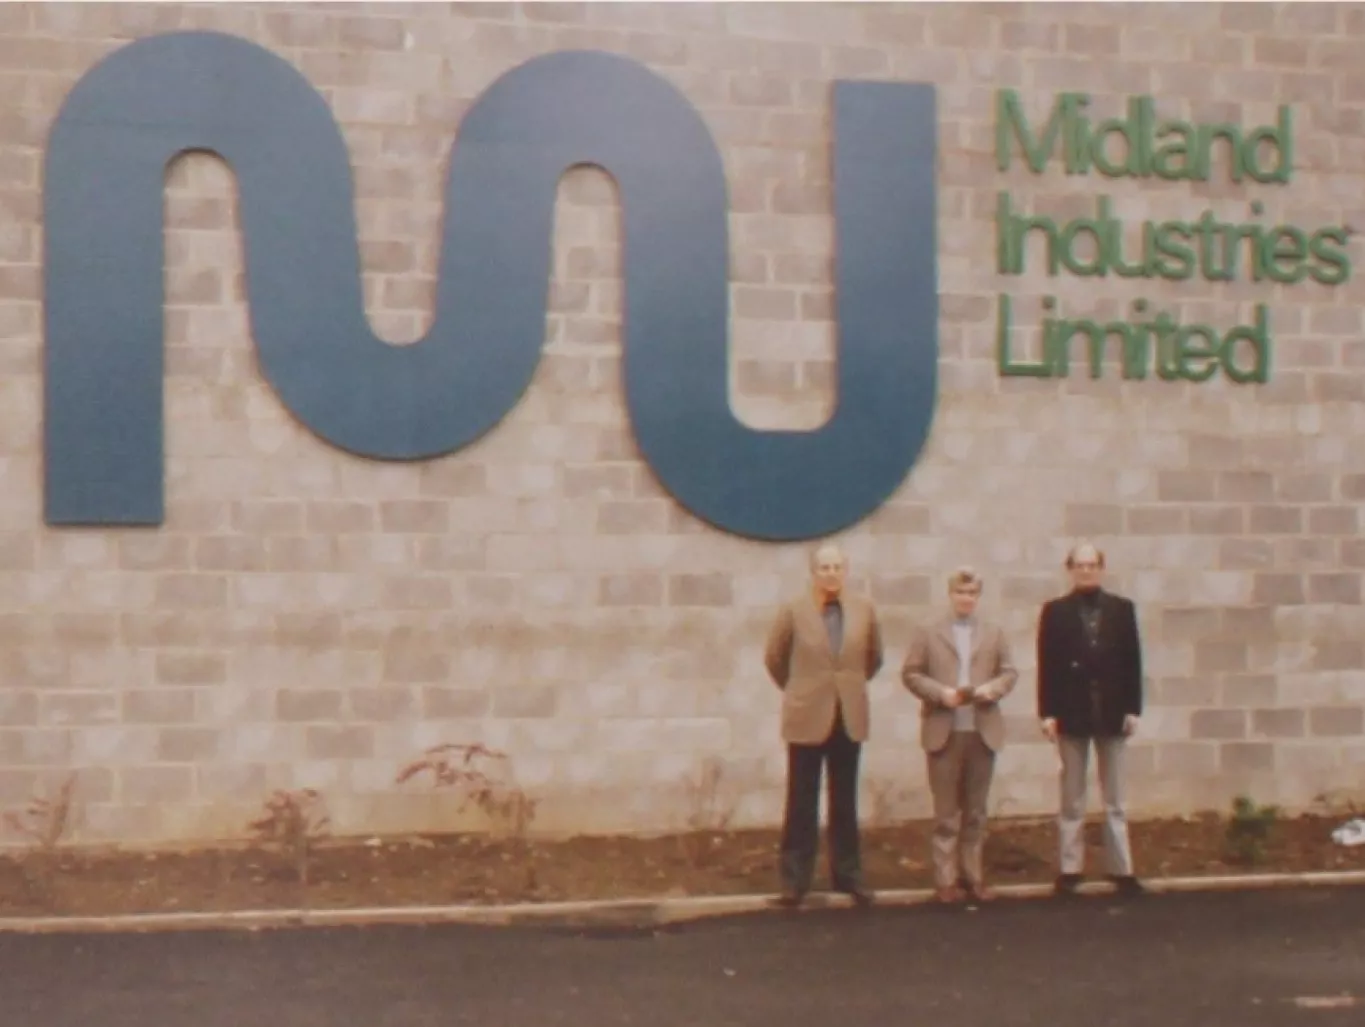 The Flair Showers team outside Midland Industries Limited in 1952